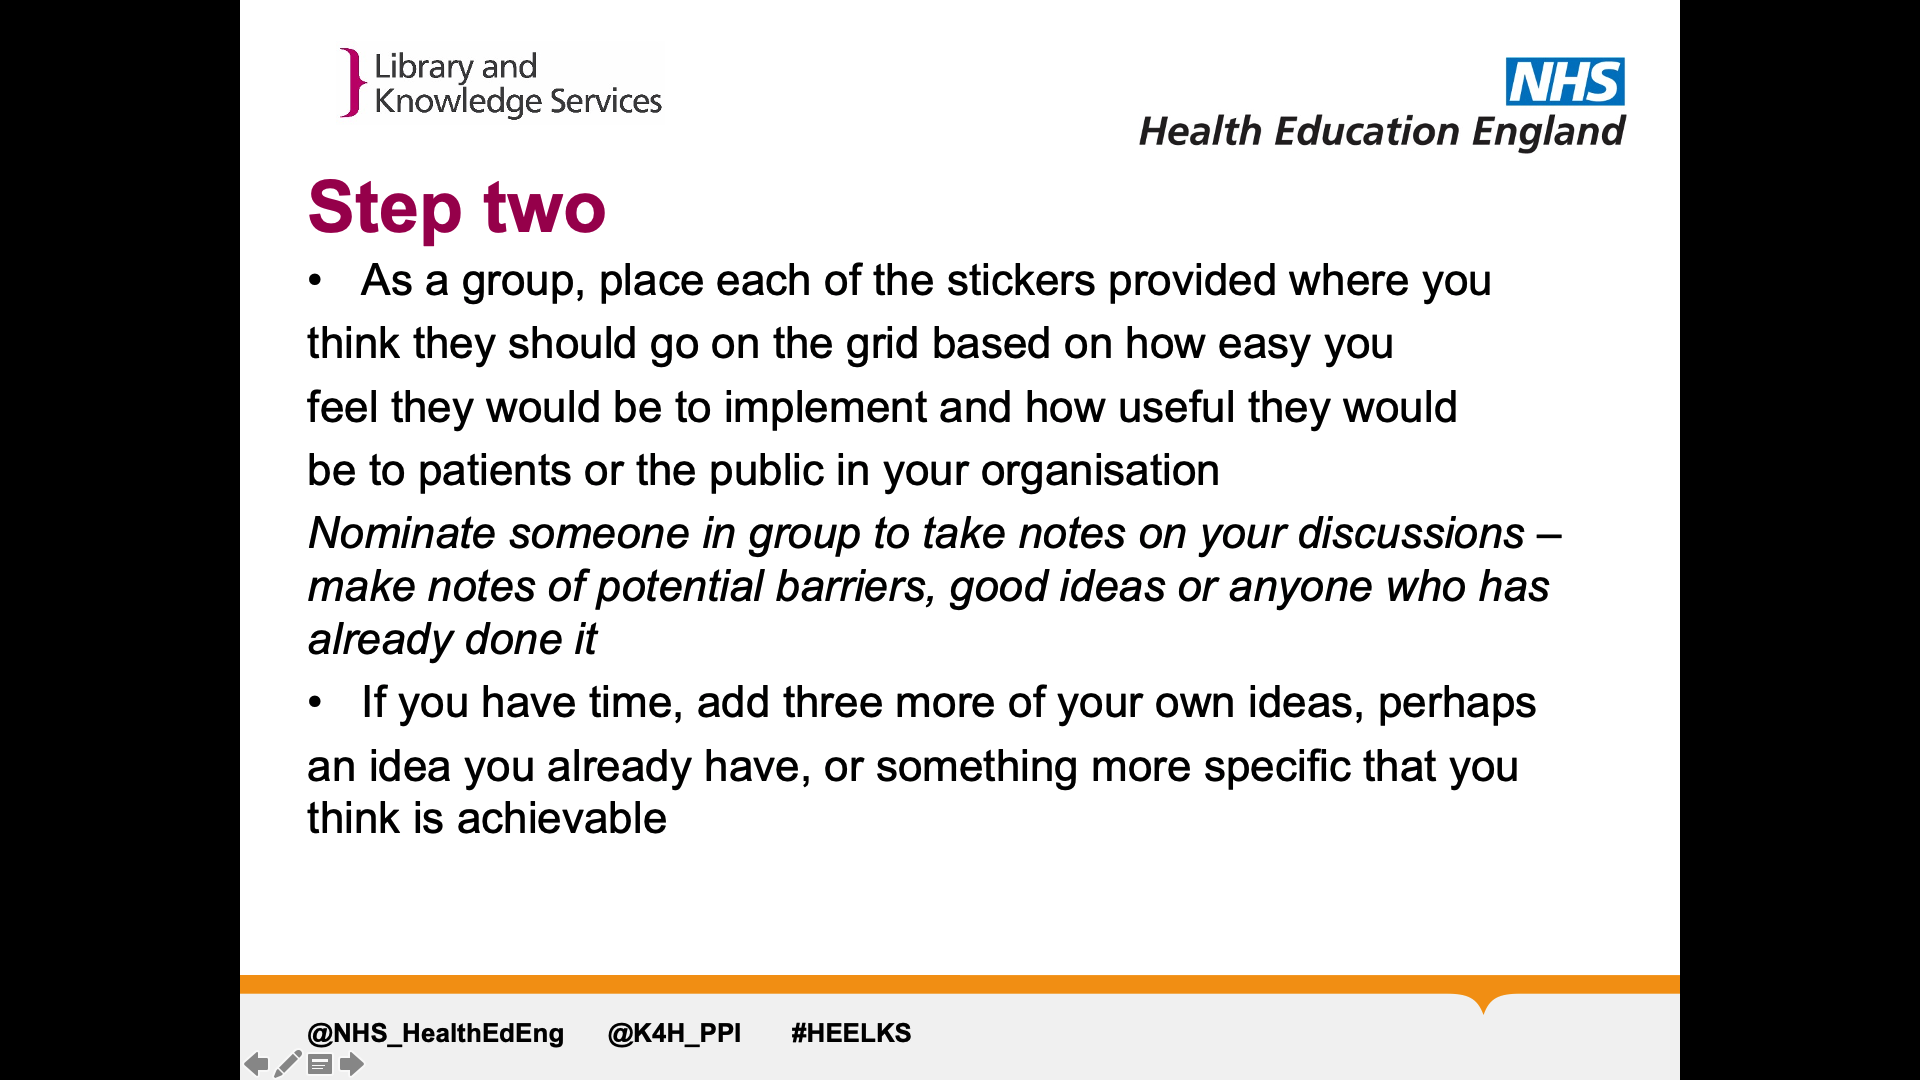 Text on page: As a group, place each of the stickers provided where you think they should go on the grid based on how easy you feel they would be to implement and how useful they would be to patients or the public in your organisation  Nominate someone in group to take notes on your discussions – make notes of potential barriers, good ideas or anyone who has already done it If you have time, add three more of your own ideas, perhaps an idea you already have, or something more specific that you think is achievable